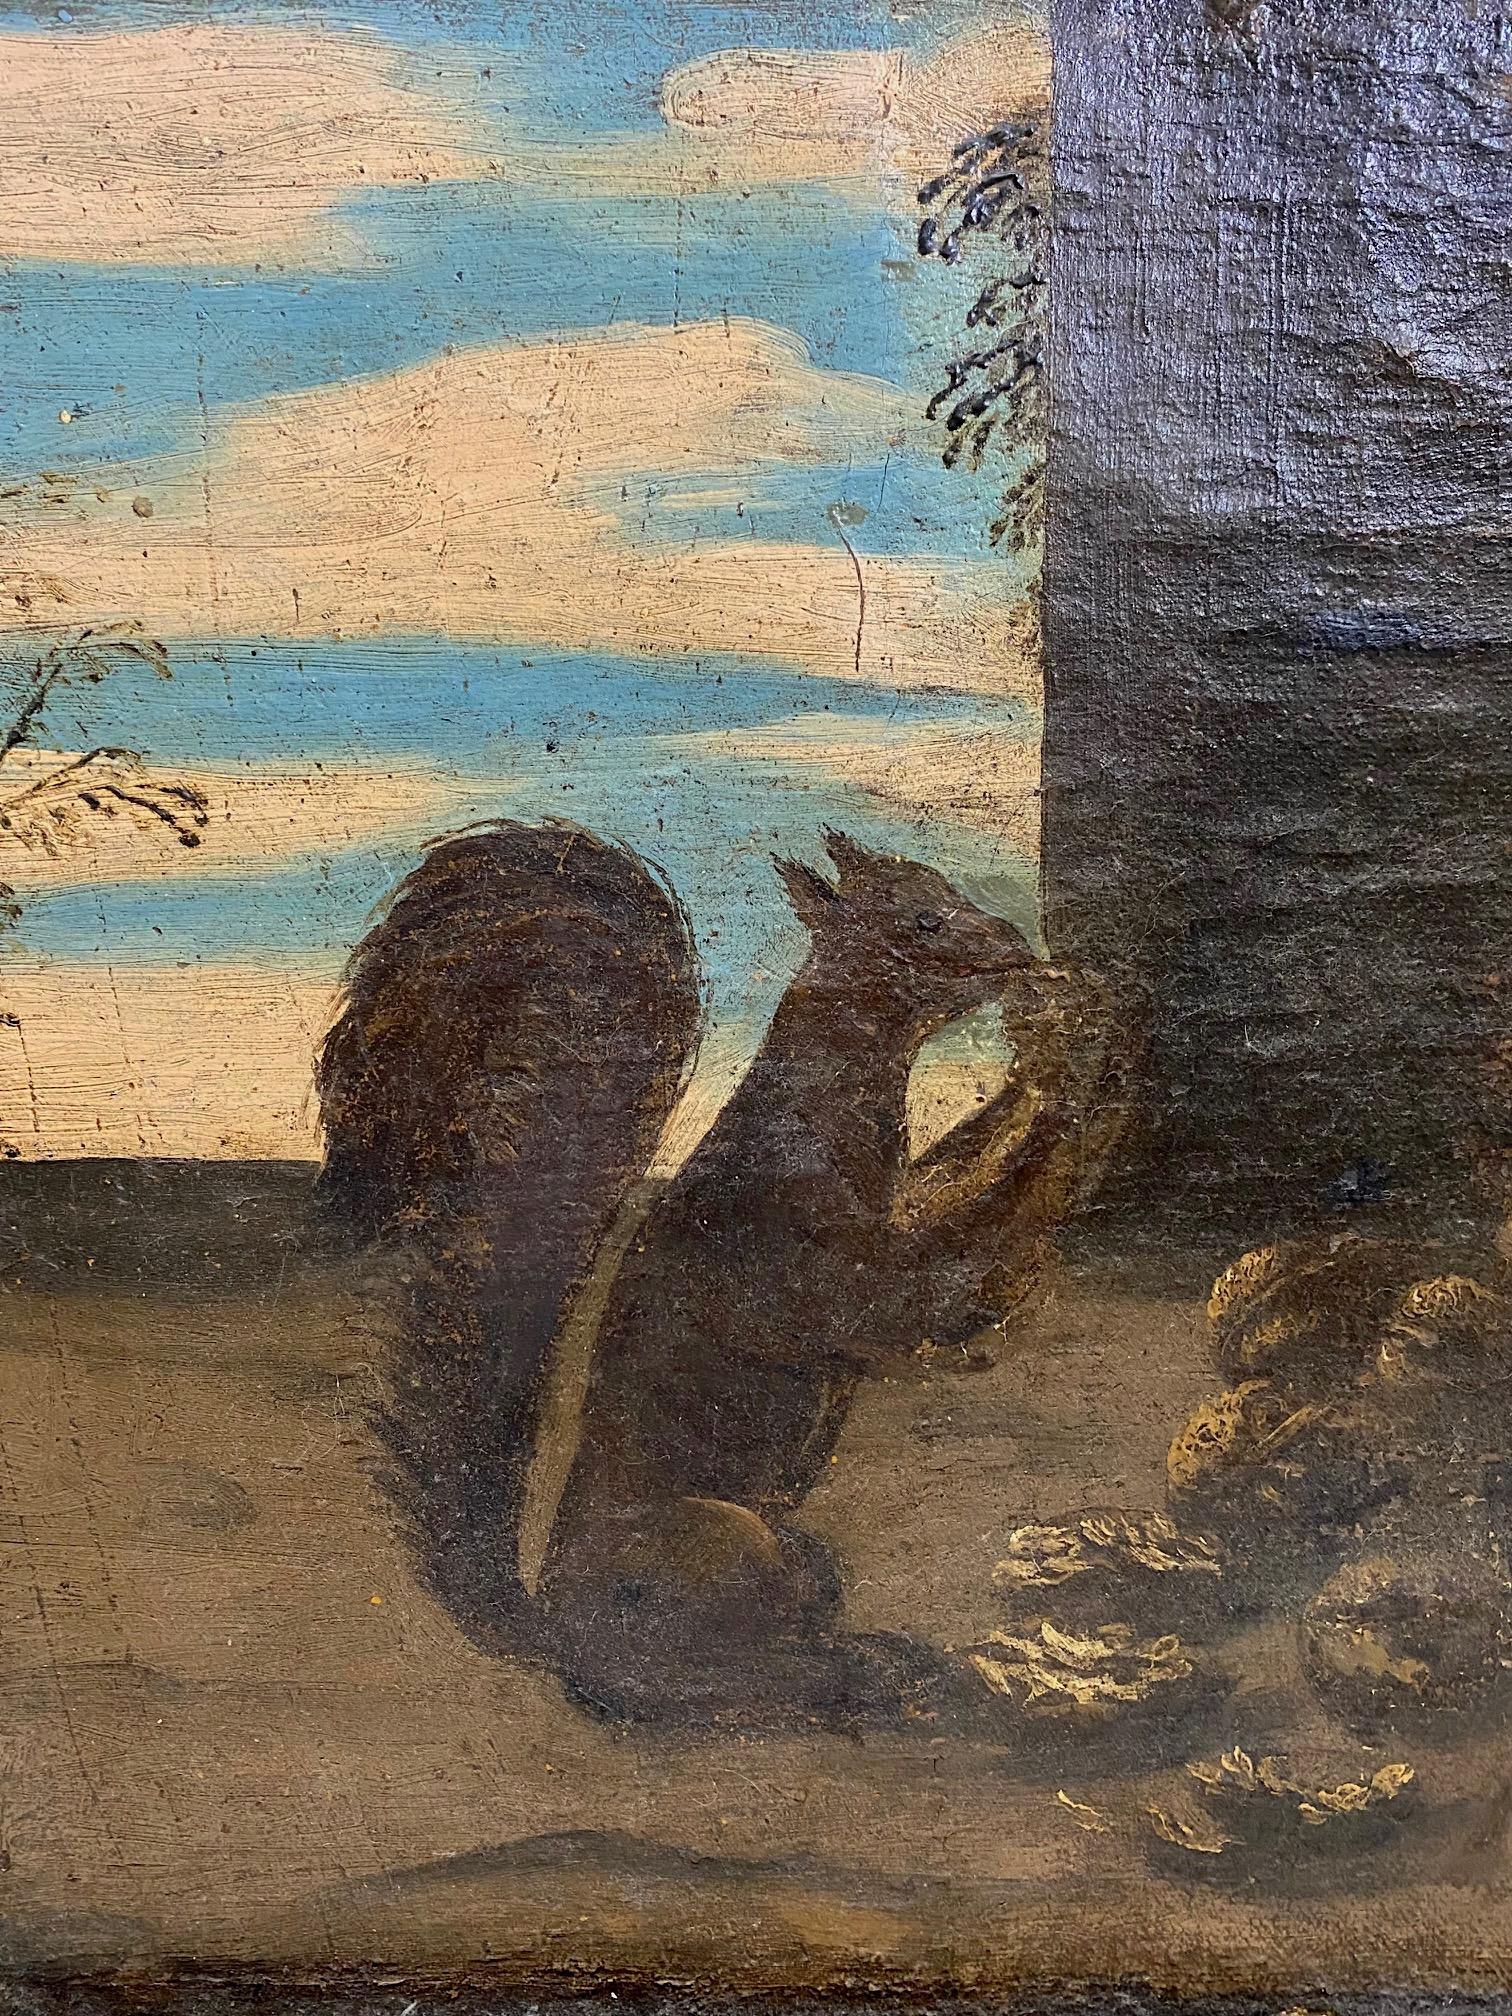 Great and Fun Folk Art painting of a squirrel eating nuts roughly late 18th century, early 19th century. Painted on linen in a striking antique wooden frame, this sweet painting found me in an antique shop in the south of France many many years ago.